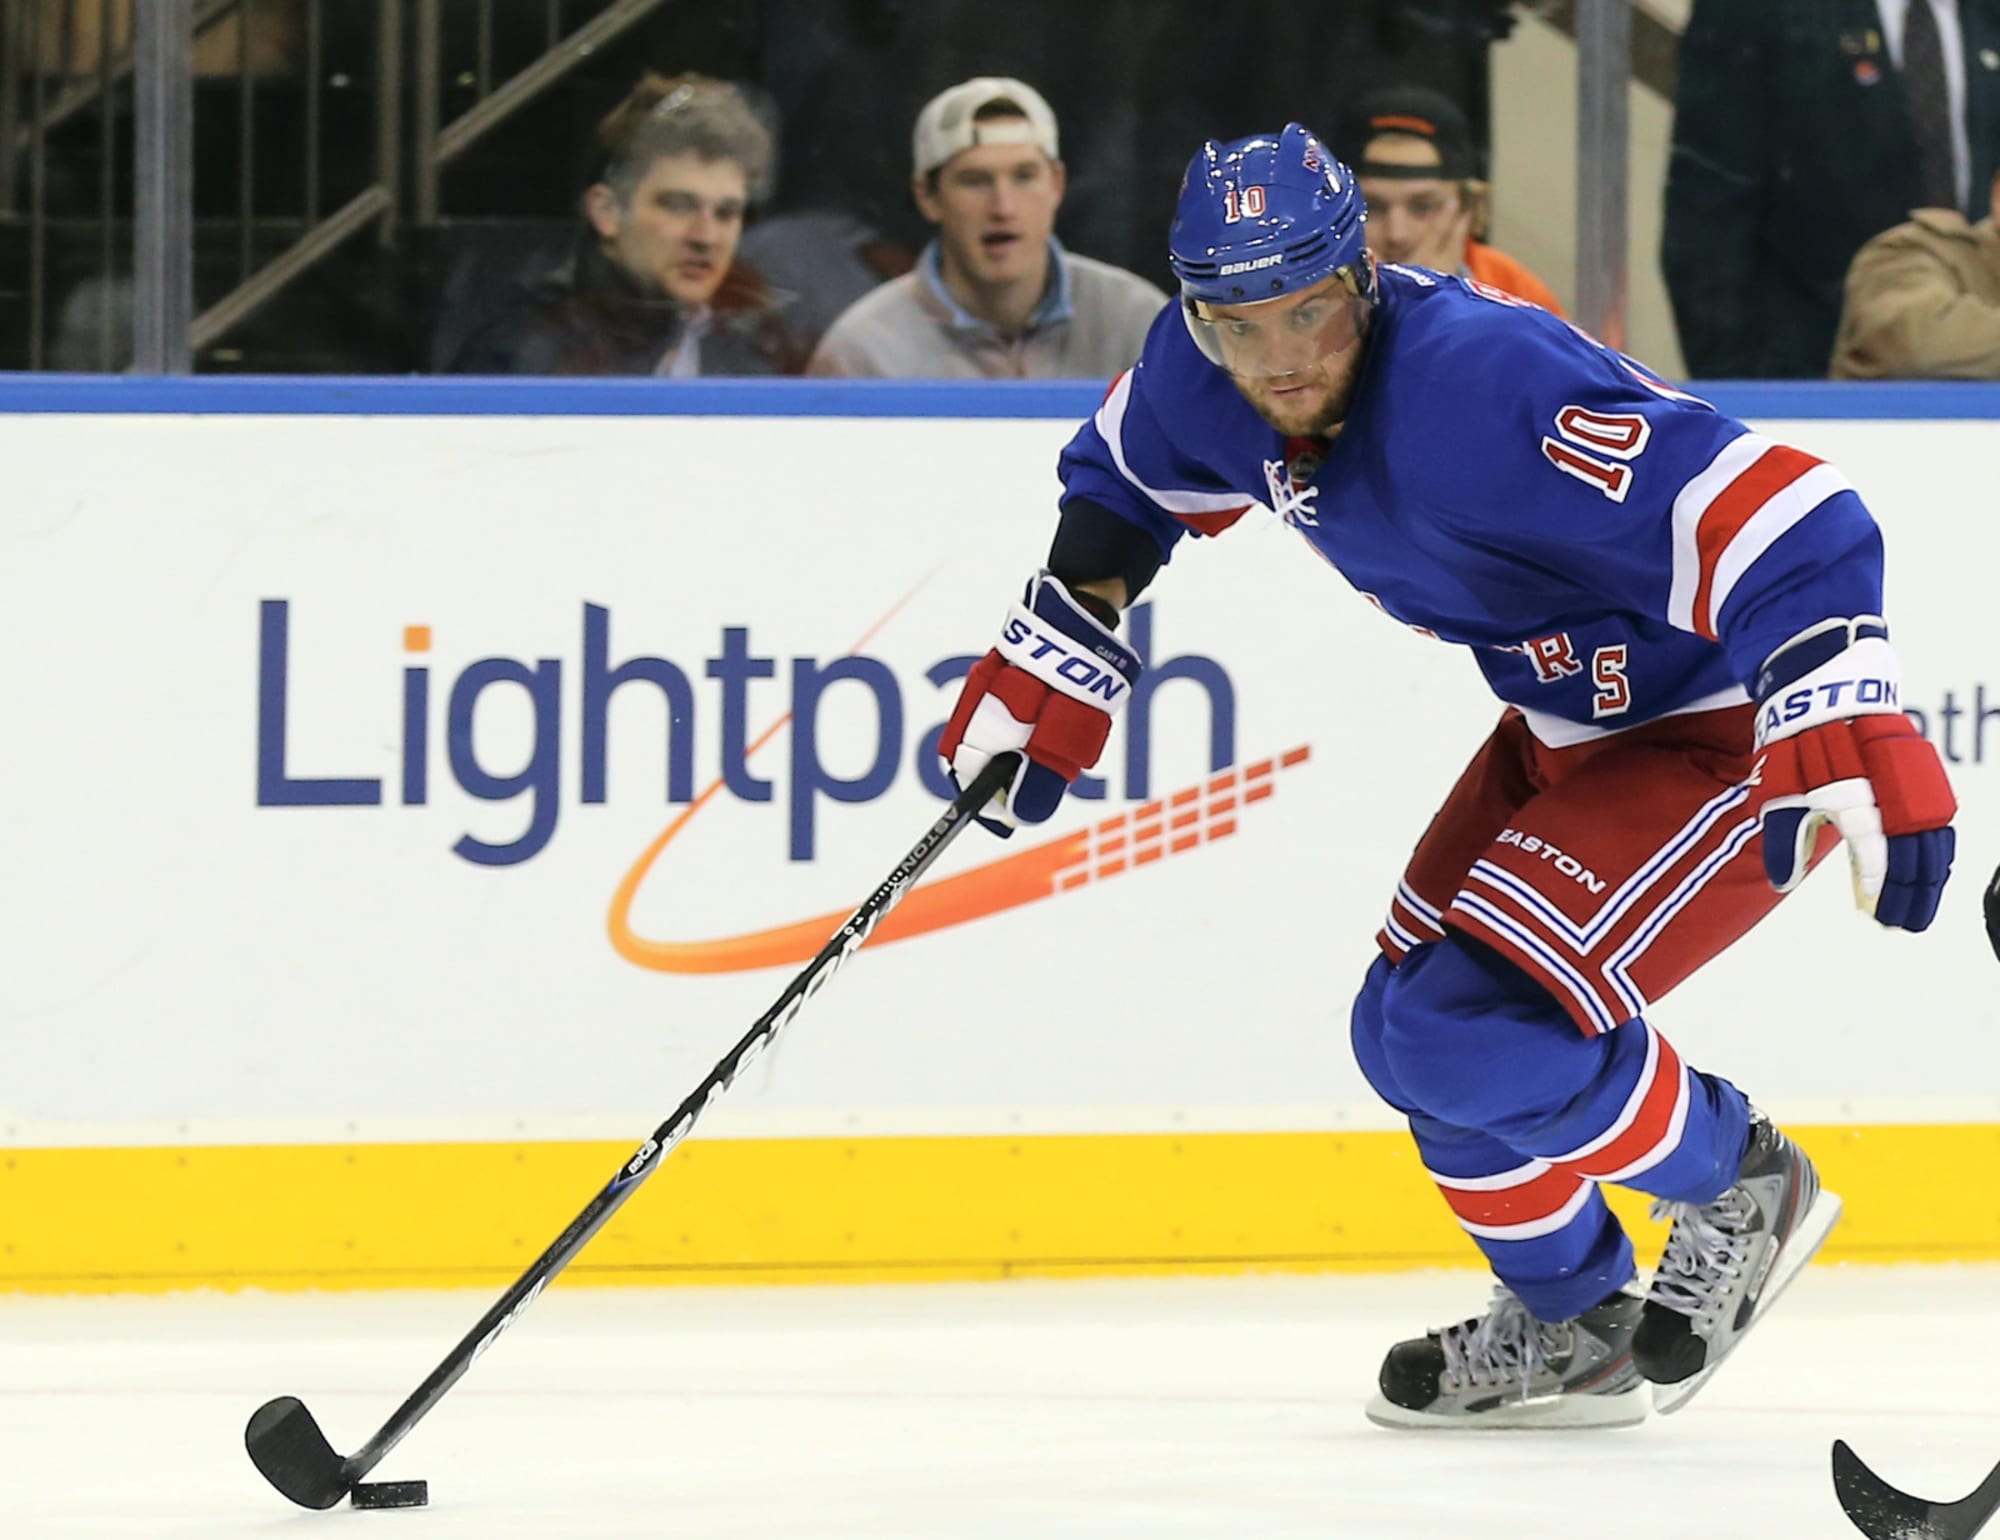 January 1 in New York Rangers history: A Winter Classic win & a bad trade